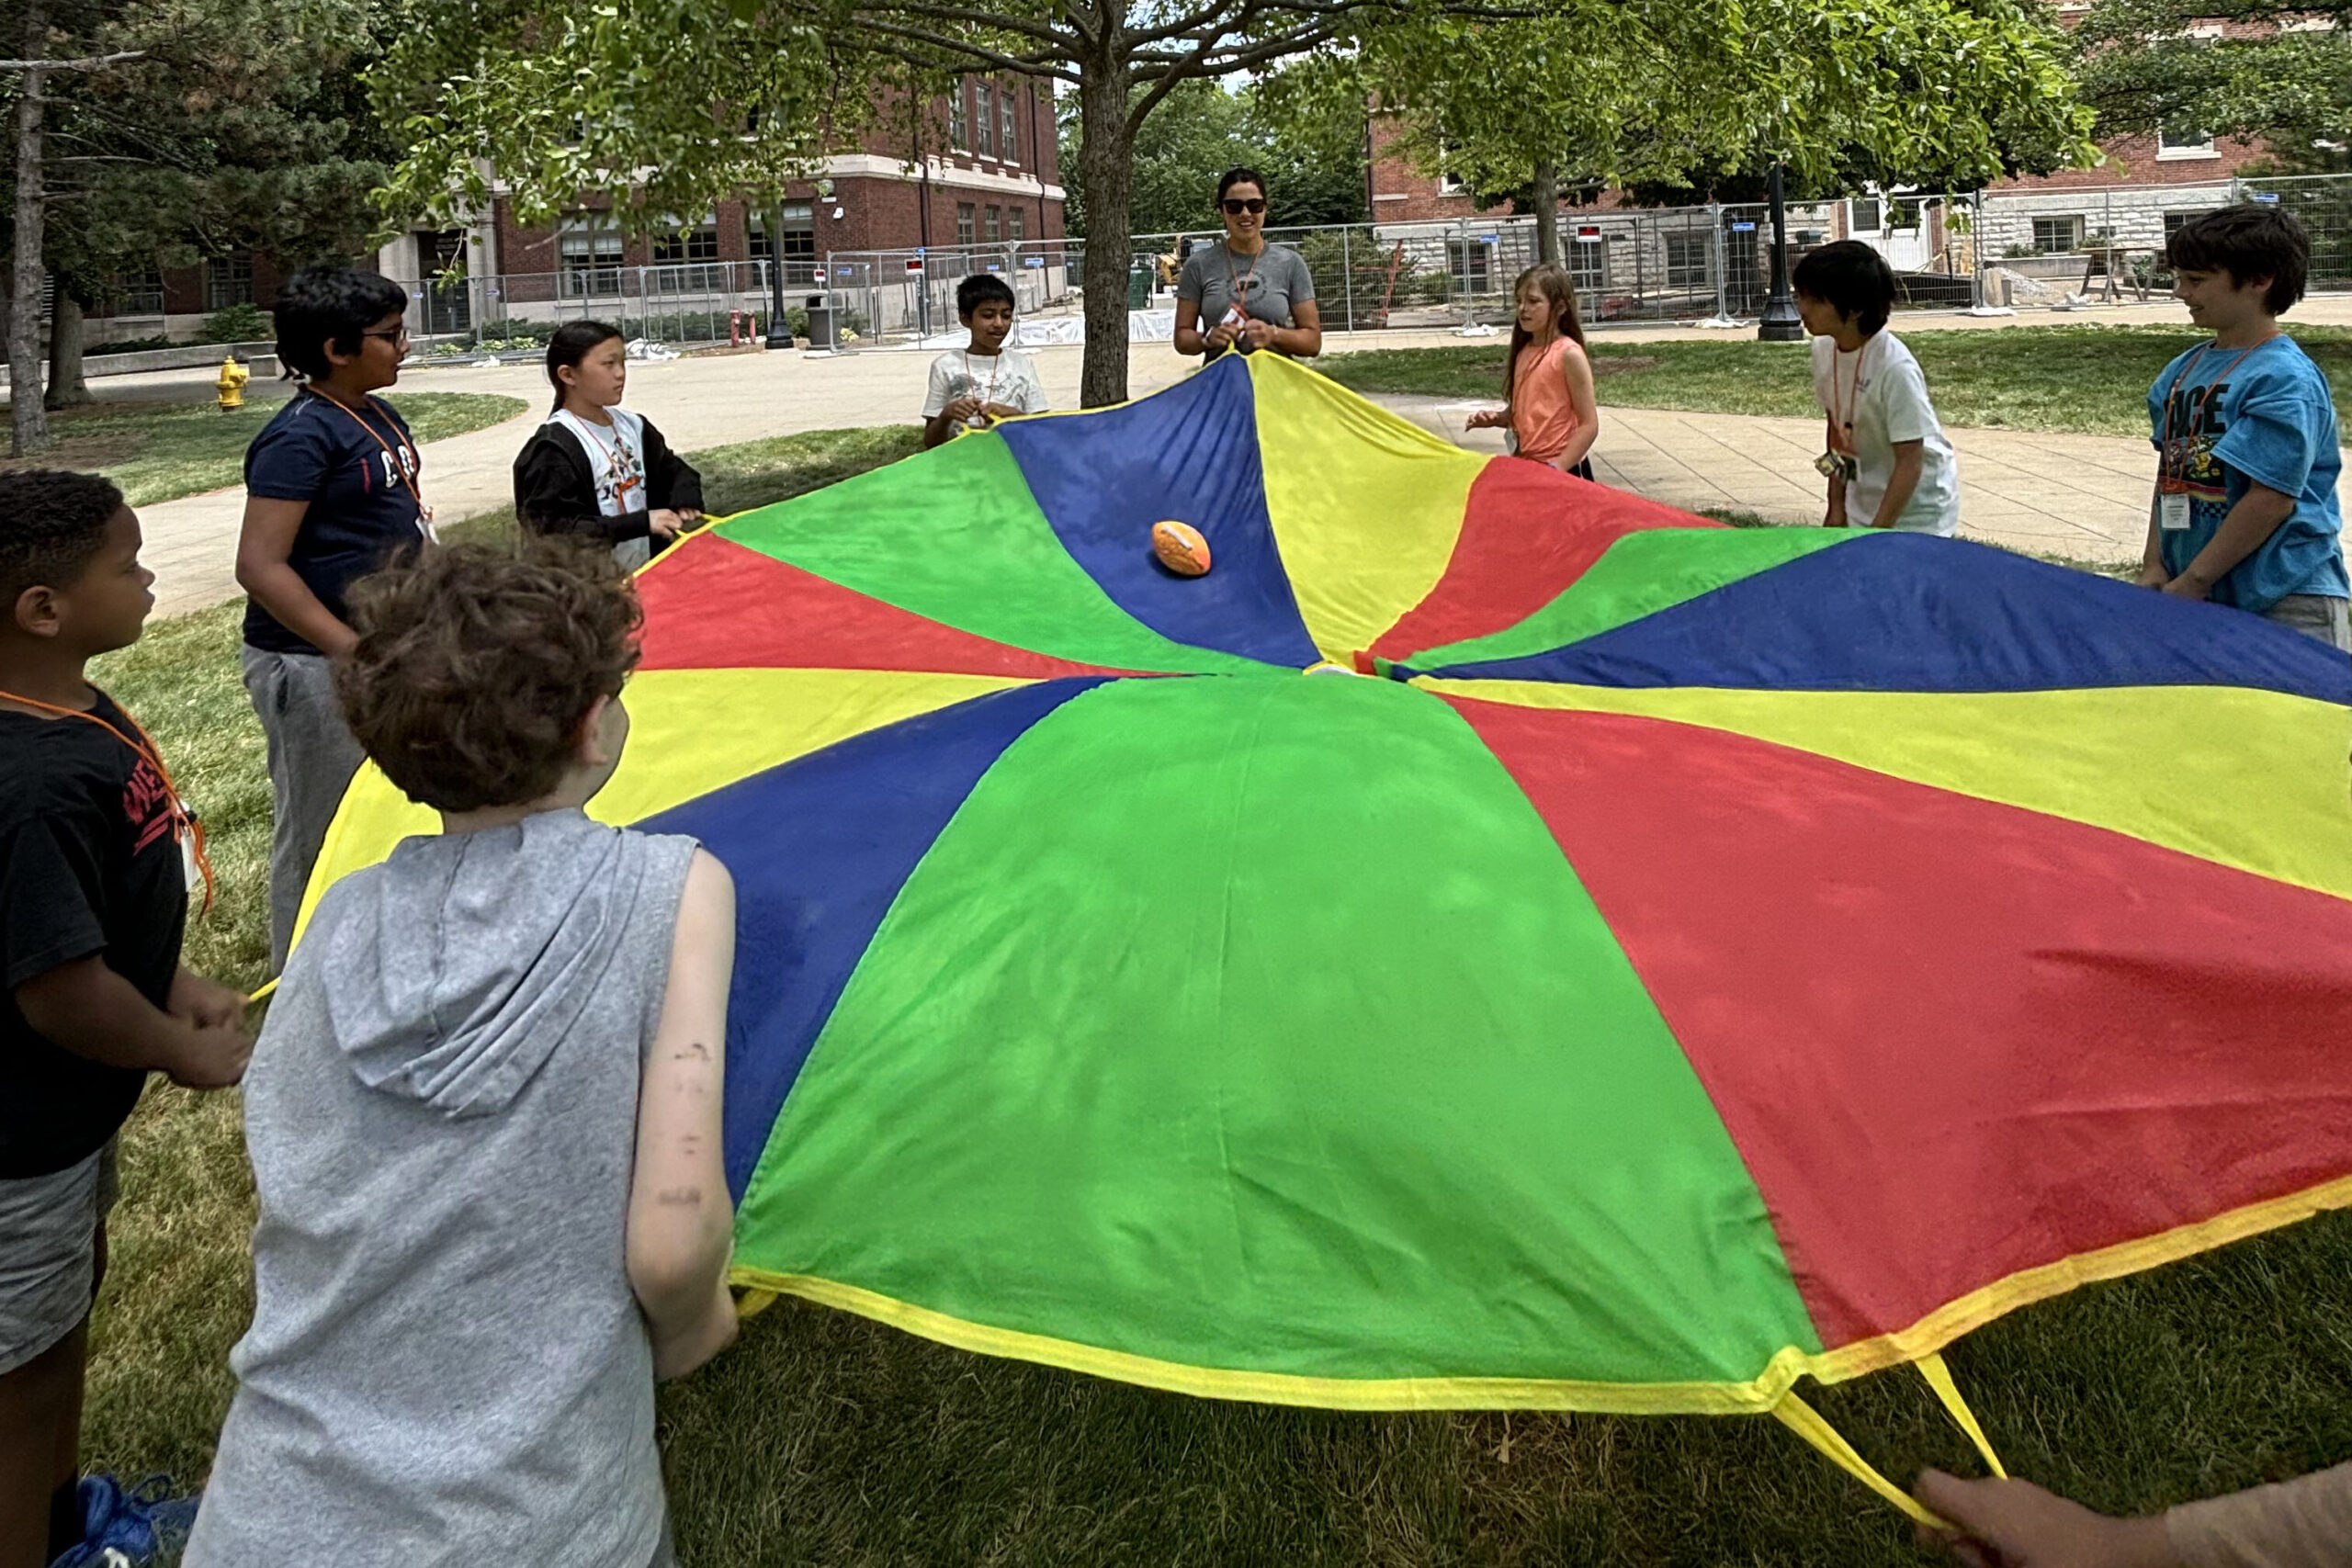 A group of GER2I students playing a teambuilding activity outside. Each student is holding a handle of a large circular colorful sheet.